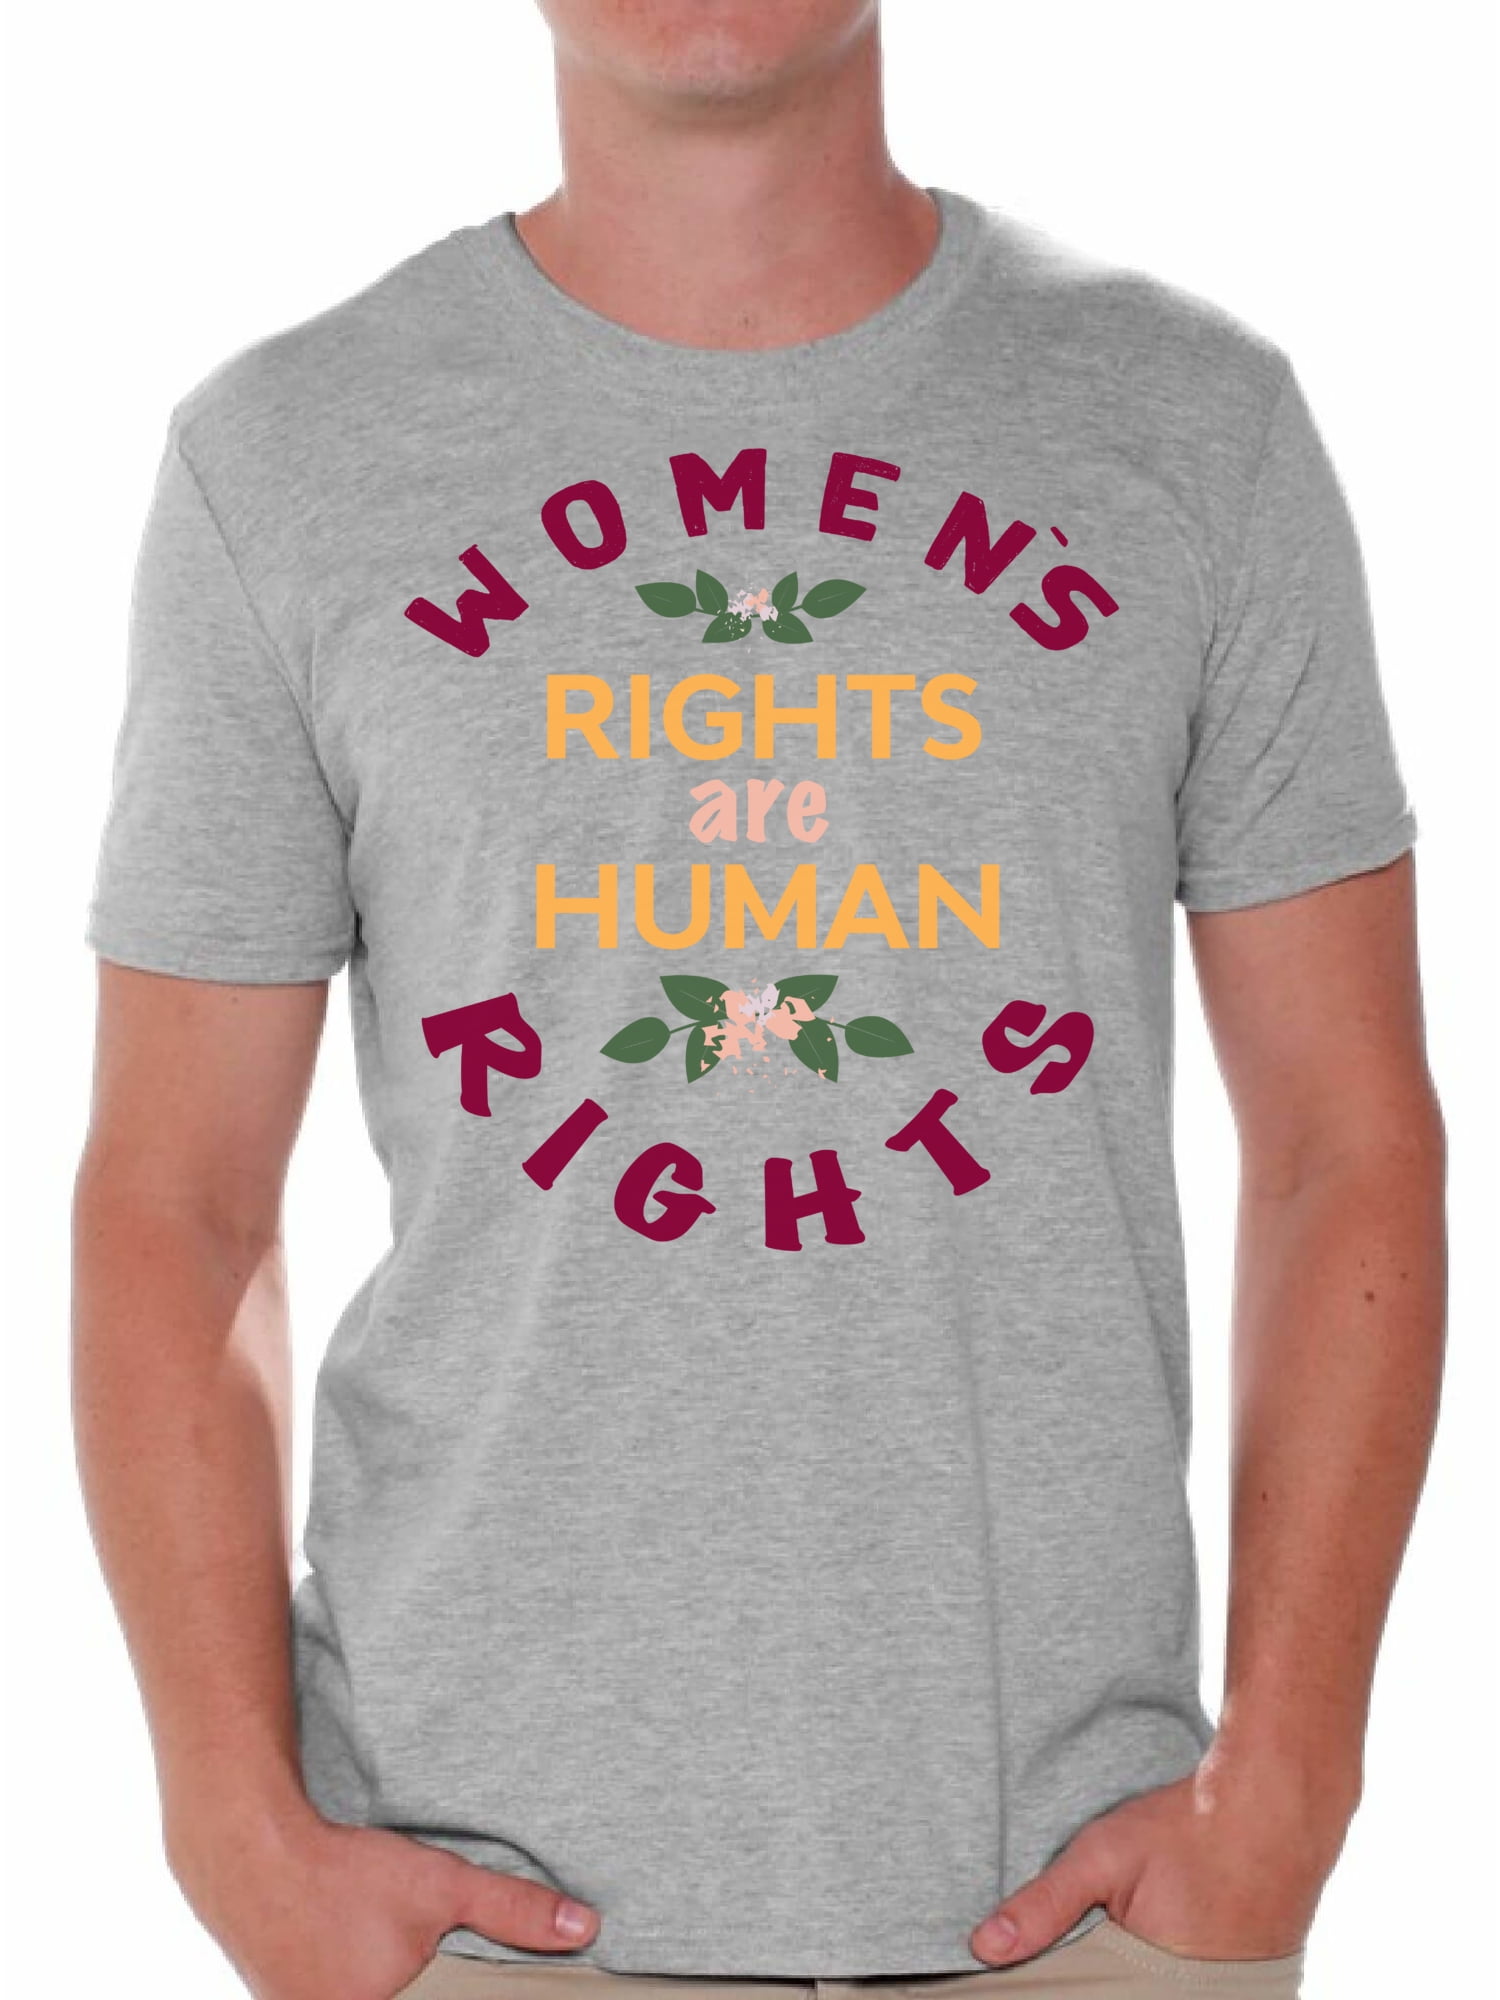 Awkward Styles Women's Rights are Human Rights T-Shirt Feminist T Shirts for Men Feminism Protest Tee Walmart.com